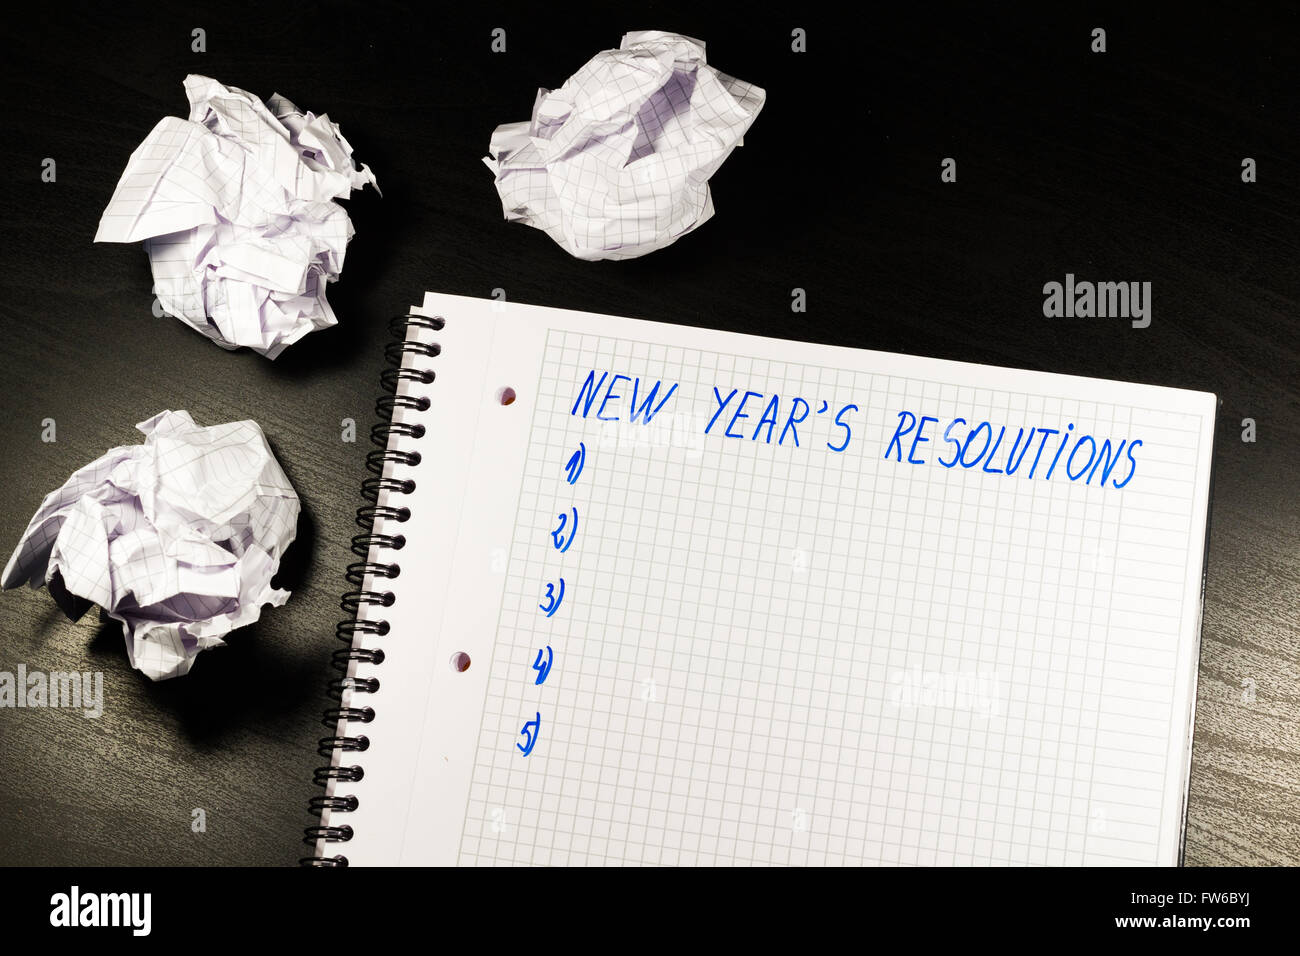 New Year's Resolution or Goals Stock Photo